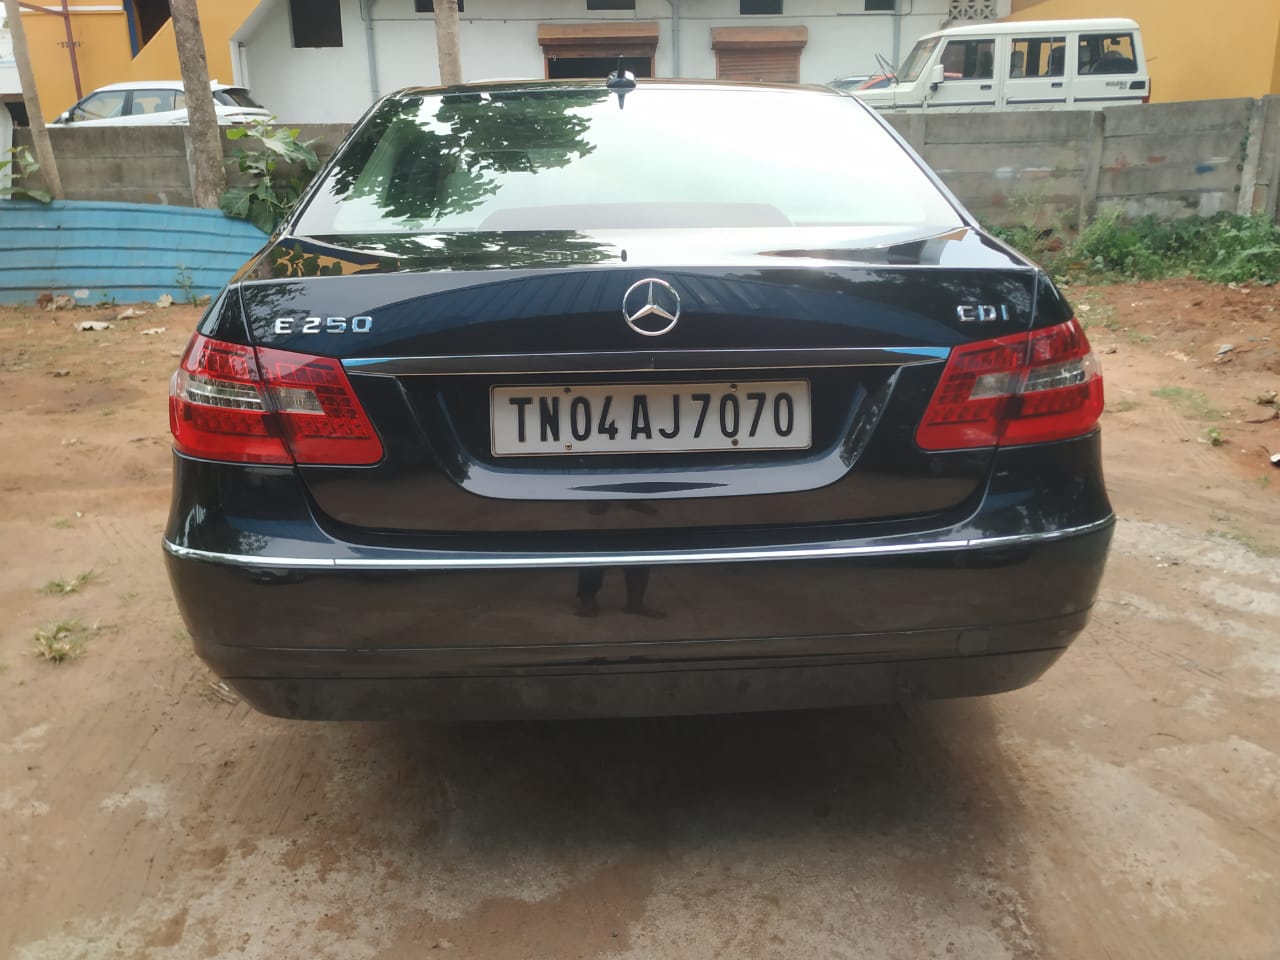 3703-for-sale-Mercedes-Benz-E-Class-Diesel-First-Owner-2012-TN-registered-rs-1399999